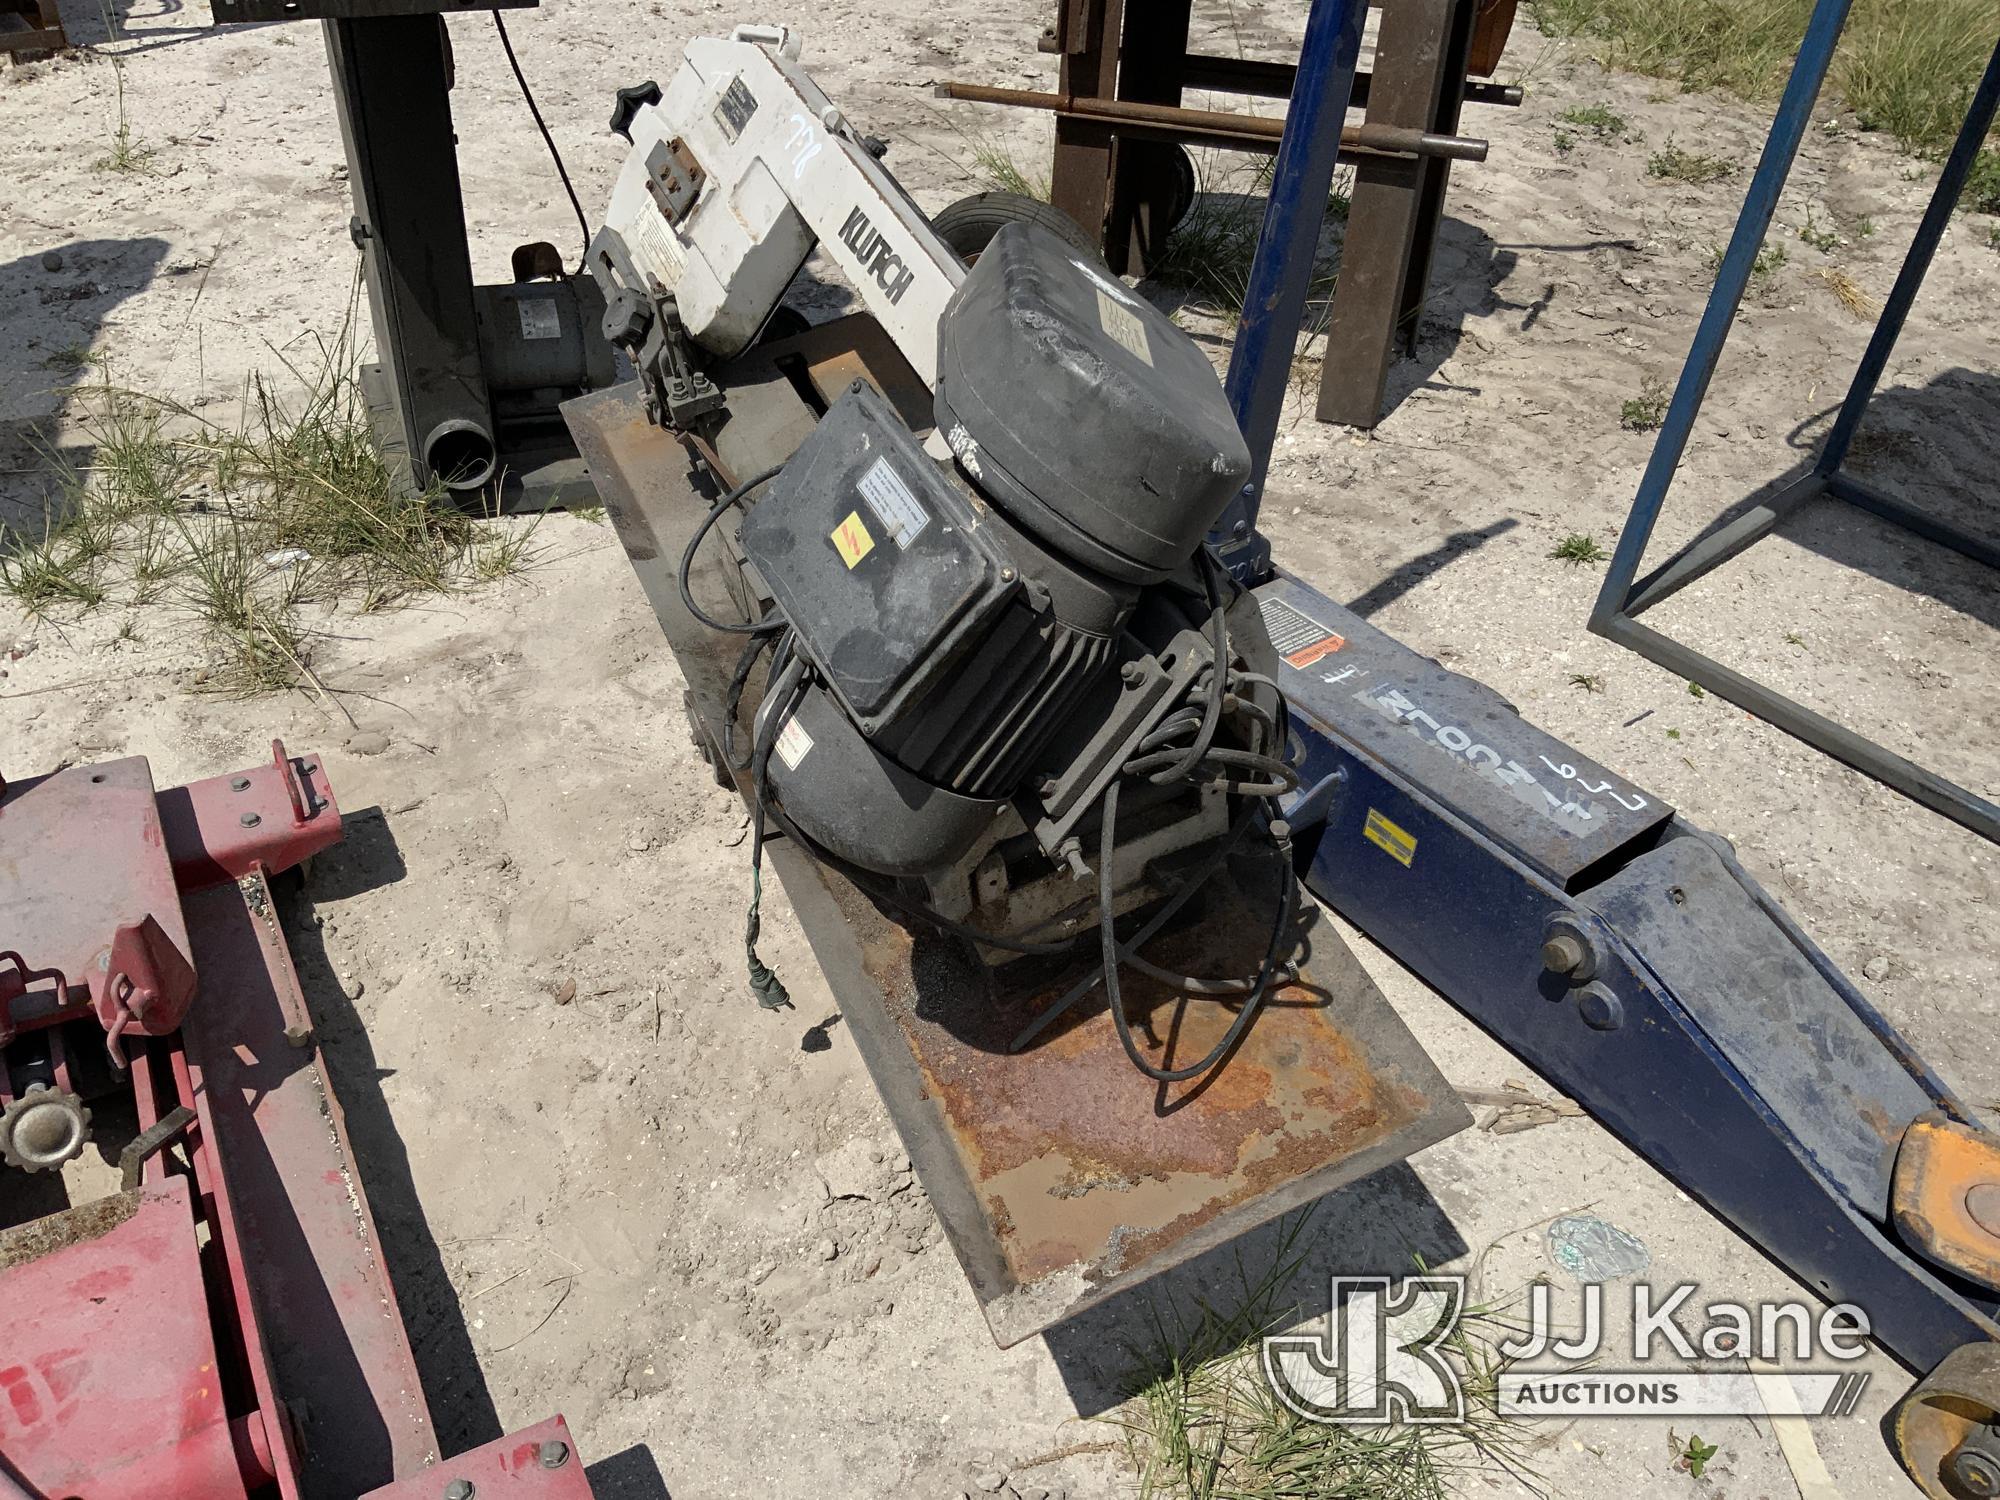 (Westlake, FL) Klutch 7 inch x 12 inch Metal Bandsaw (Condition Unknown) NOTE: This unit is being so